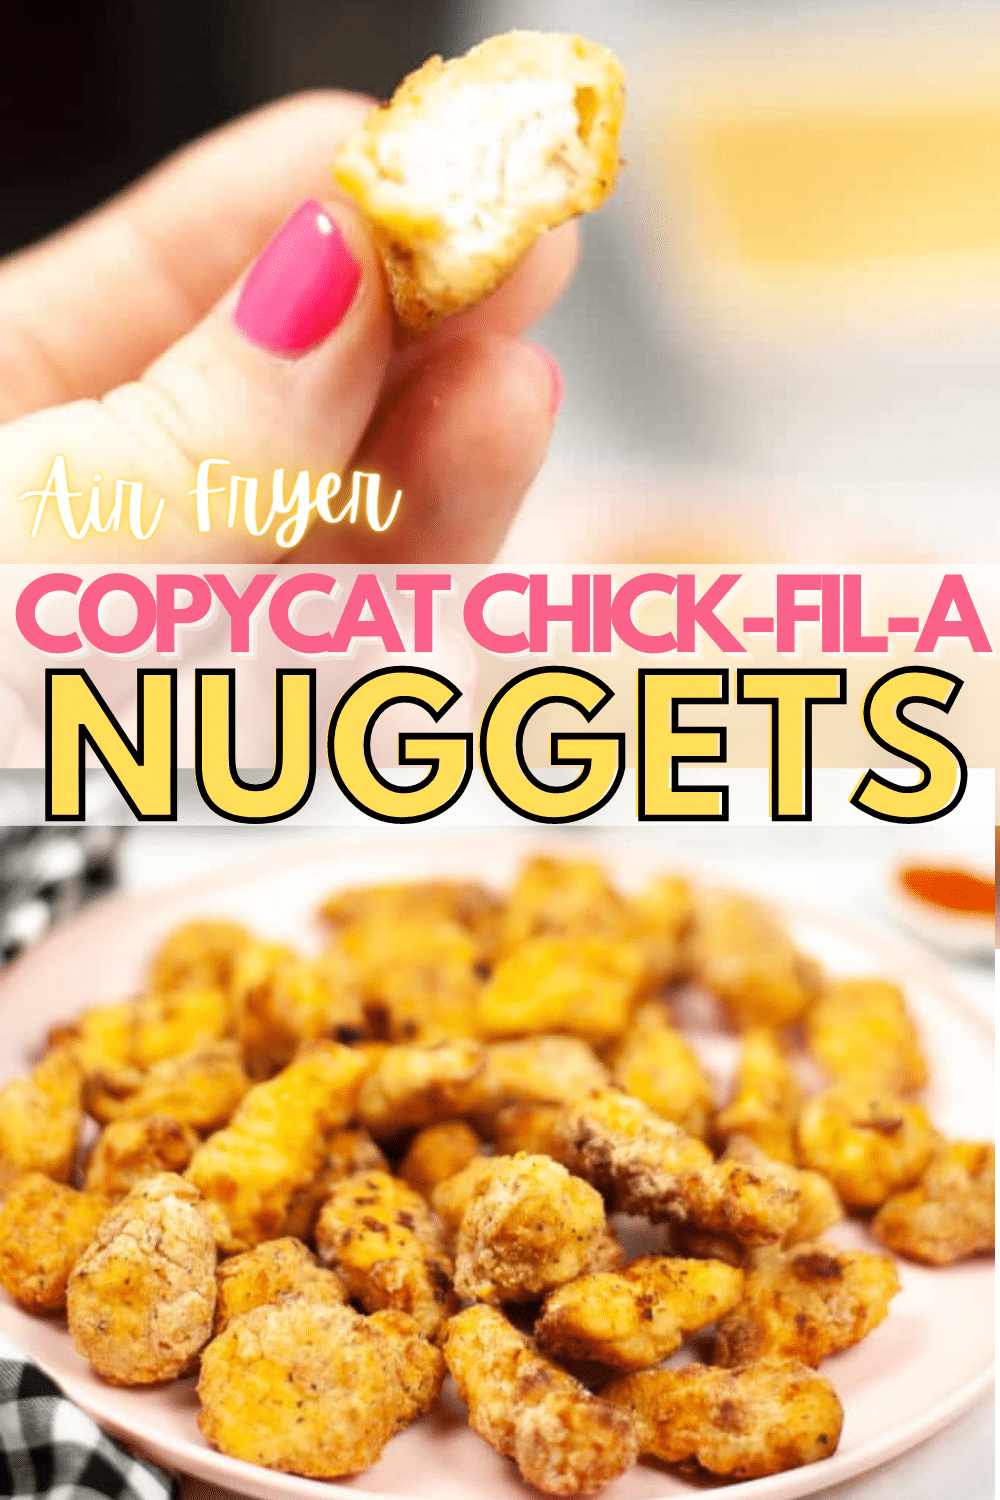 These Air Fryer Copycat Chick-Fil-A Nuggets are so good. Such a fast & easy way to make homemade chicken nuggets that are crispy & delicious! #airfryer #chickennuggets #copycatrecipe #homemade via @wondermomwannab